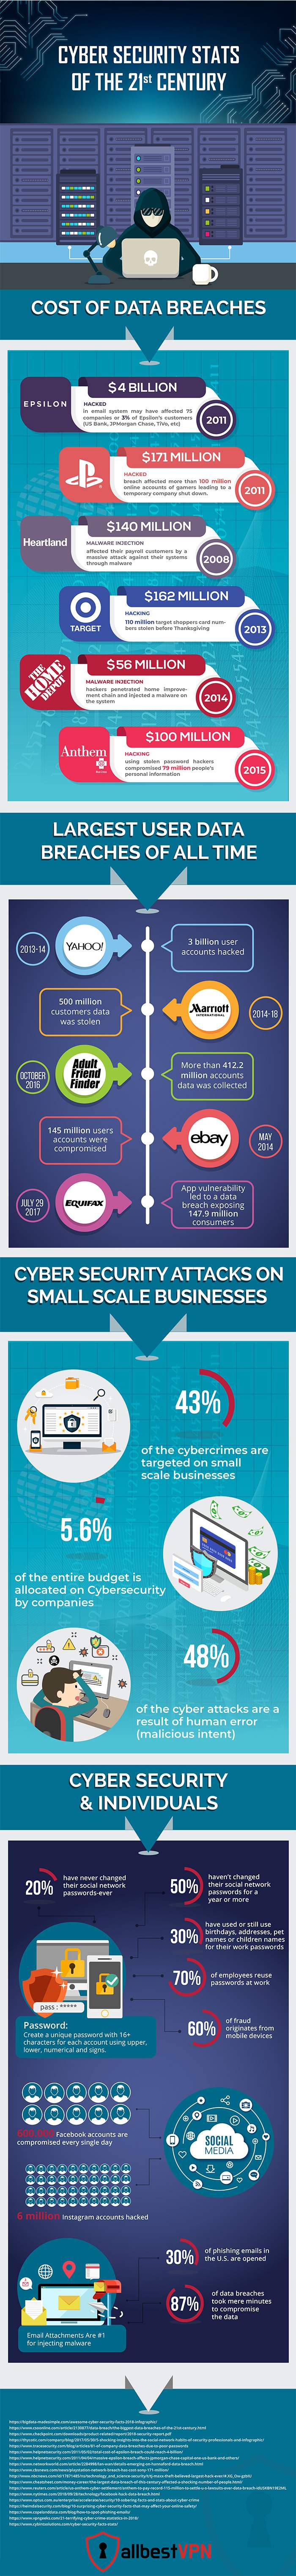 Cyber Security Stats of 21st Century